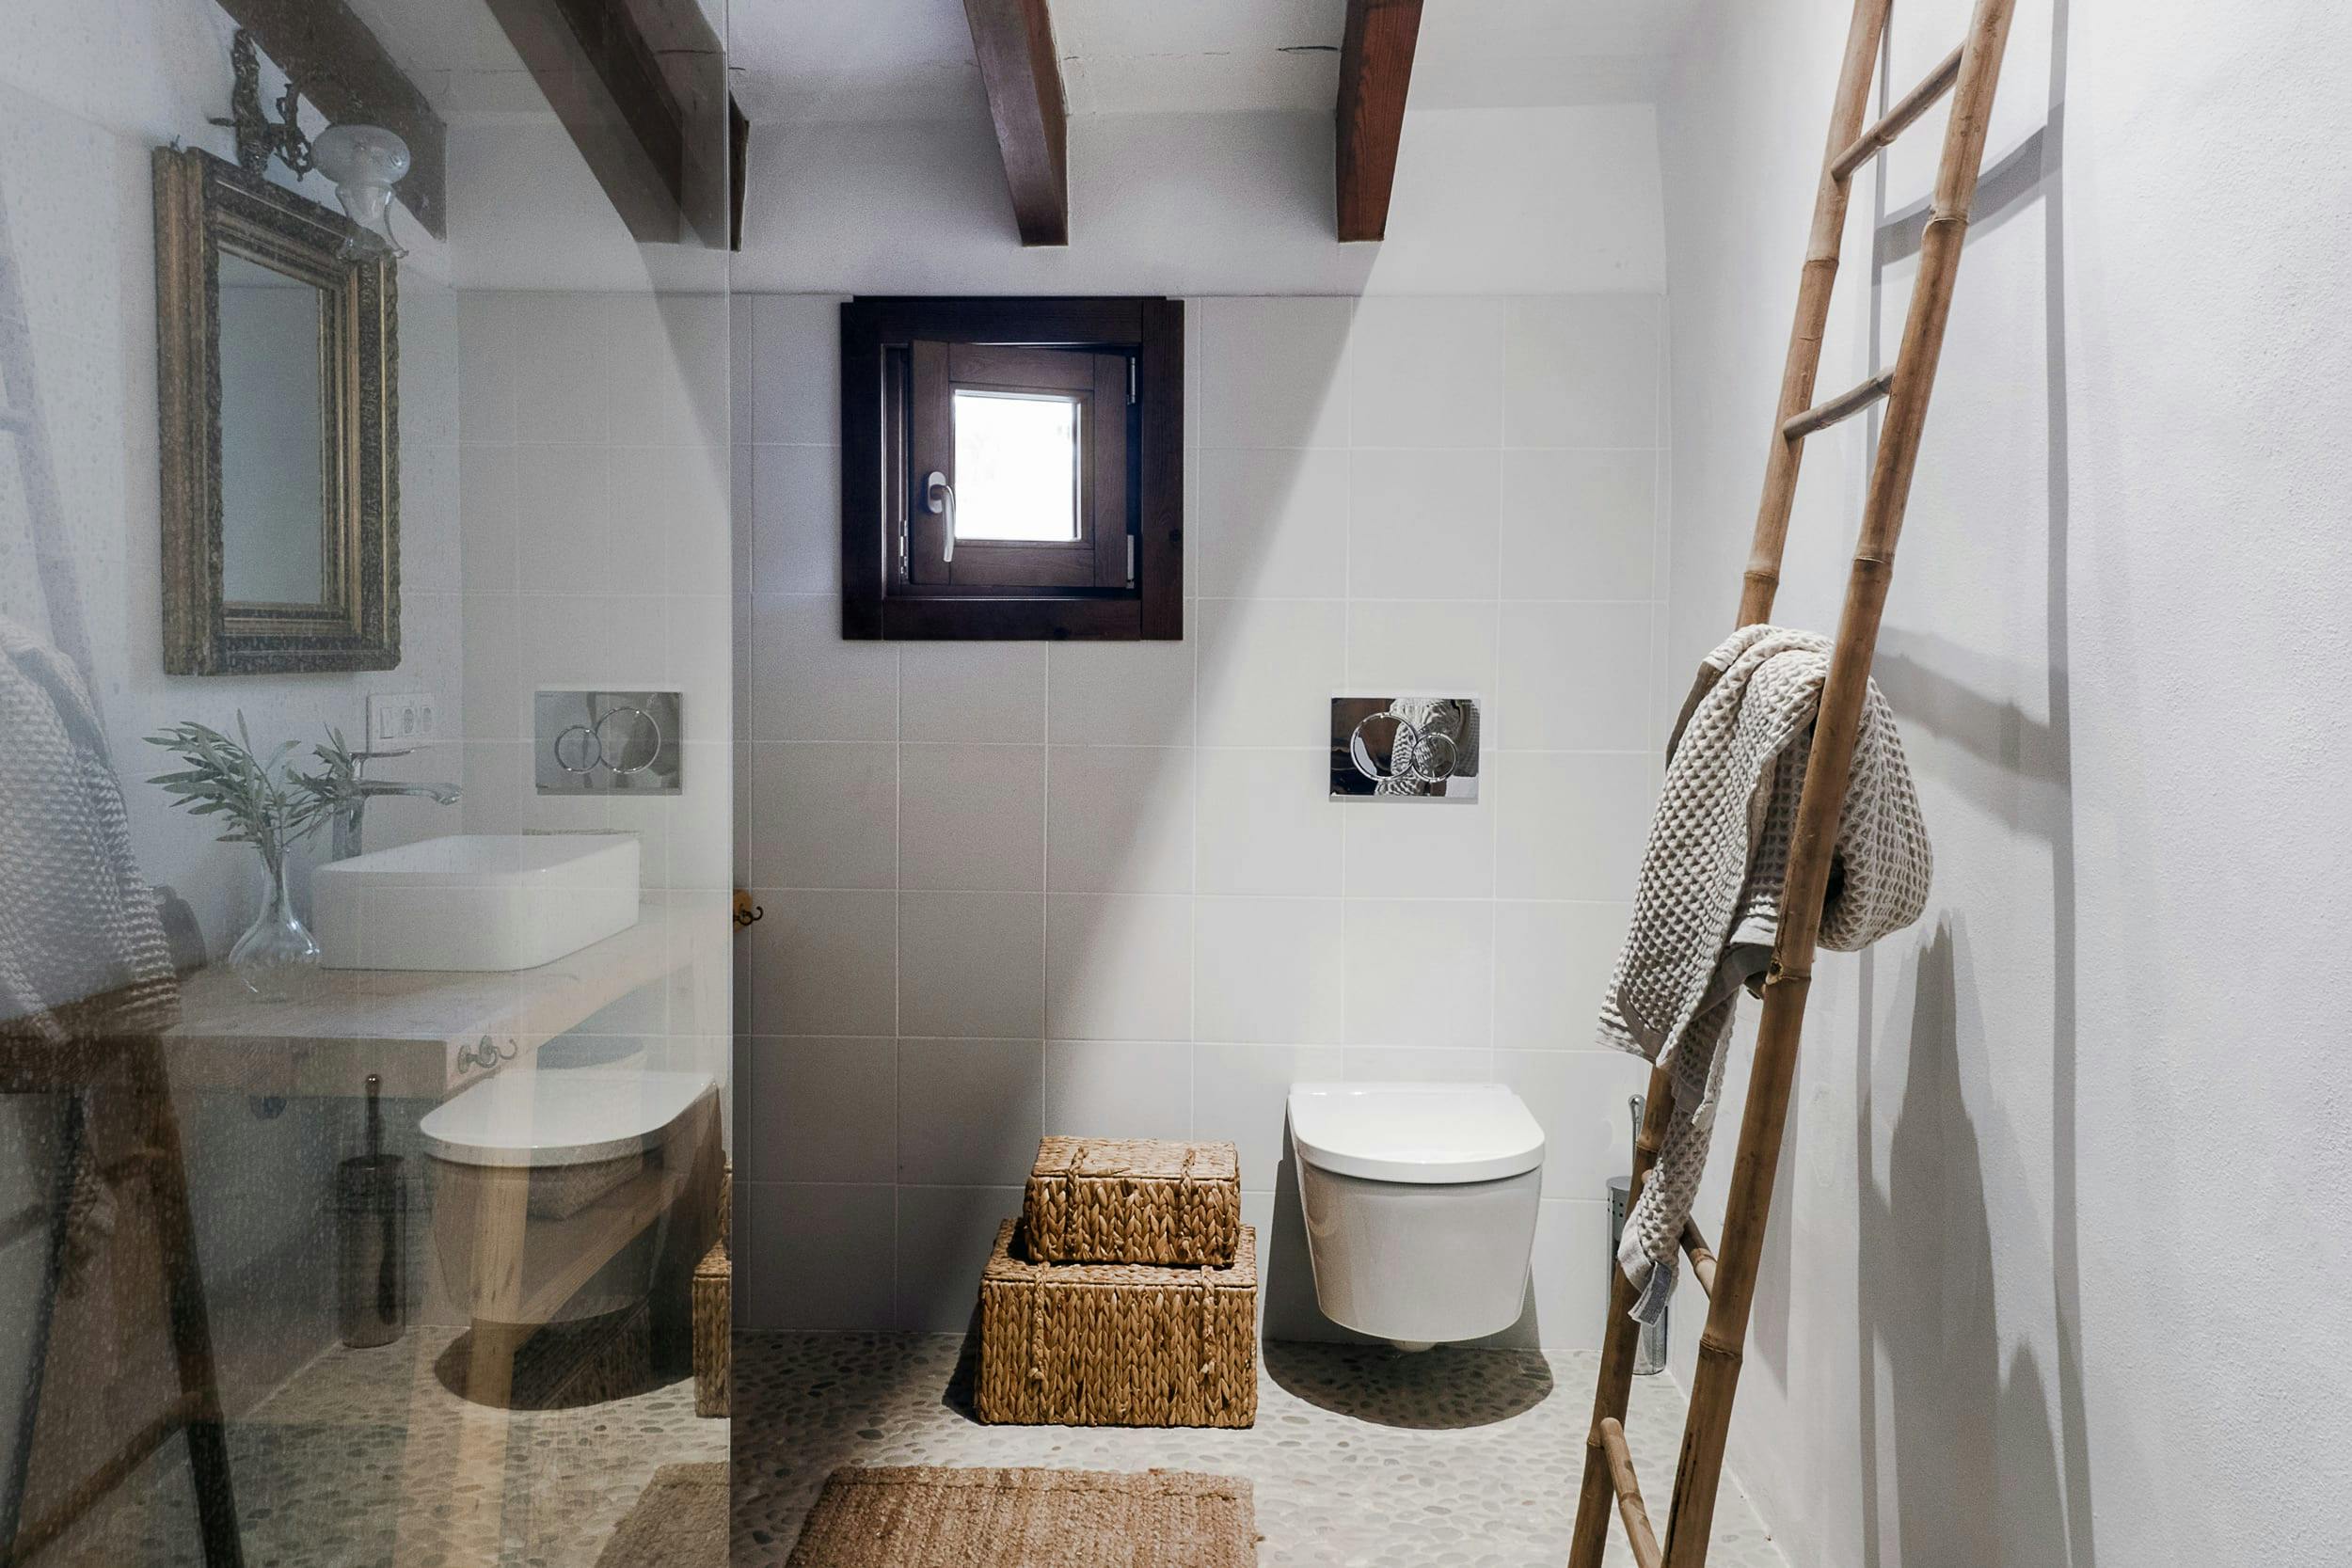 The image features a small bathroom with a white toilet, sink, and window.